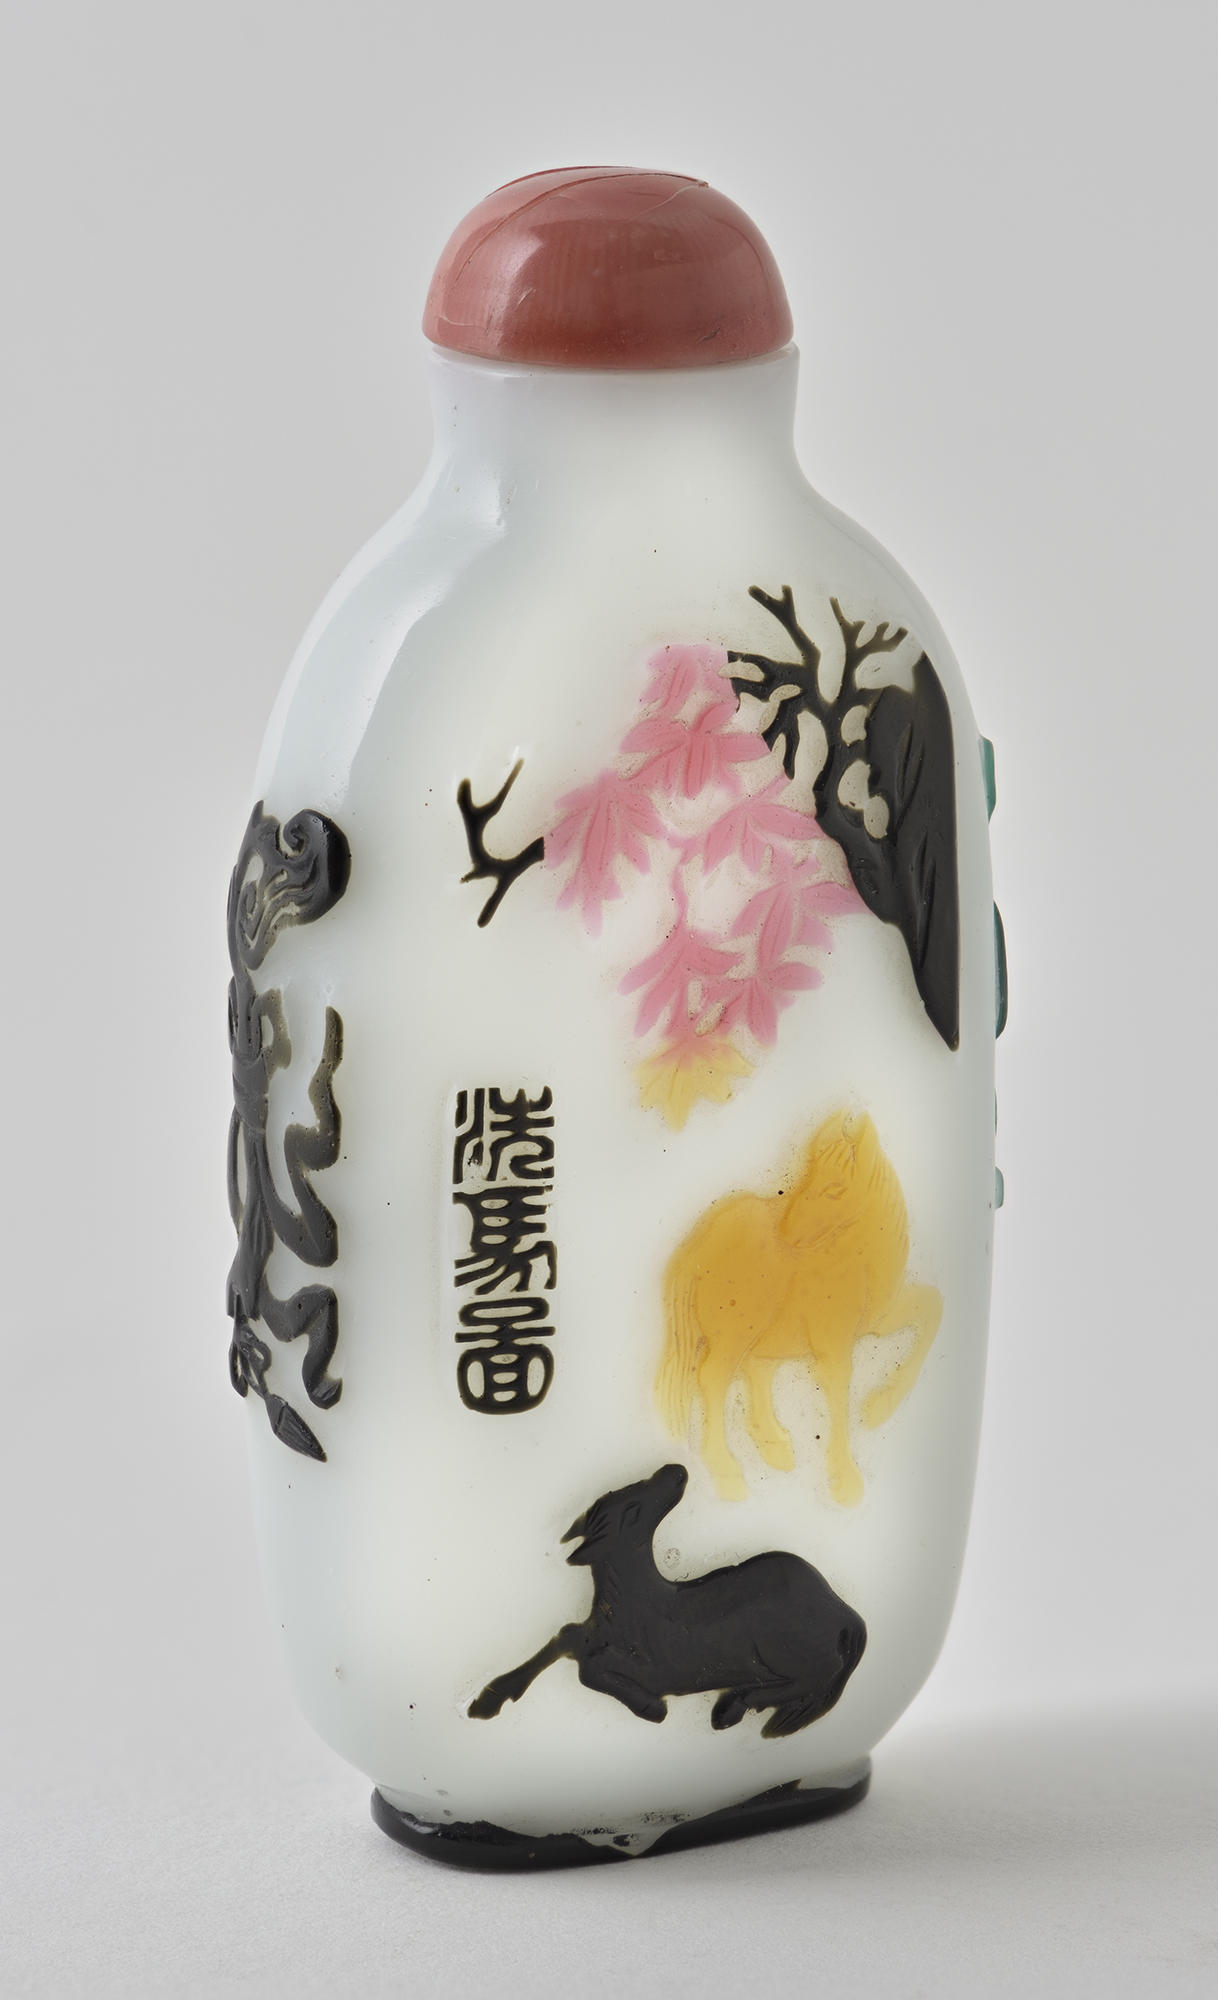  An oval-shaped snuff bottle with a red stopper. The body of the bottle is white with raised nature motifs, predominantly in black but also in pink and orange. 